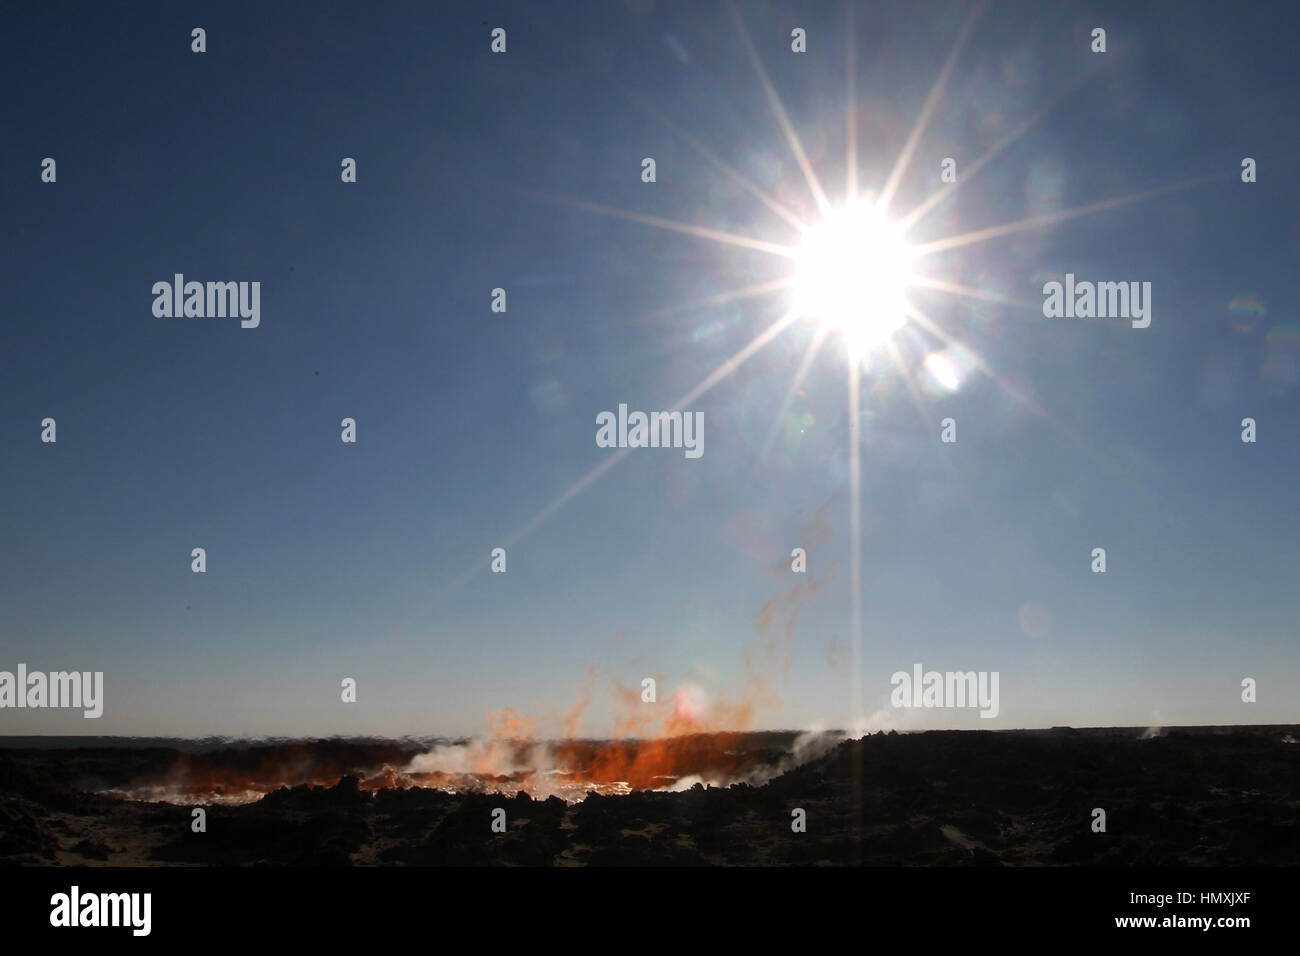 Turkmenistan, China. 6th Feb, 2017. The Door to Hell, a burning natural gas field in Derweze, Turkmenistan. The burning natural gas field where Soviet scientists lit a fire in 1971, is located in the middle of the Karakum Desert. Credit: SIPA Asia/ZUMA Wire/Alamy Live News Stock Photo